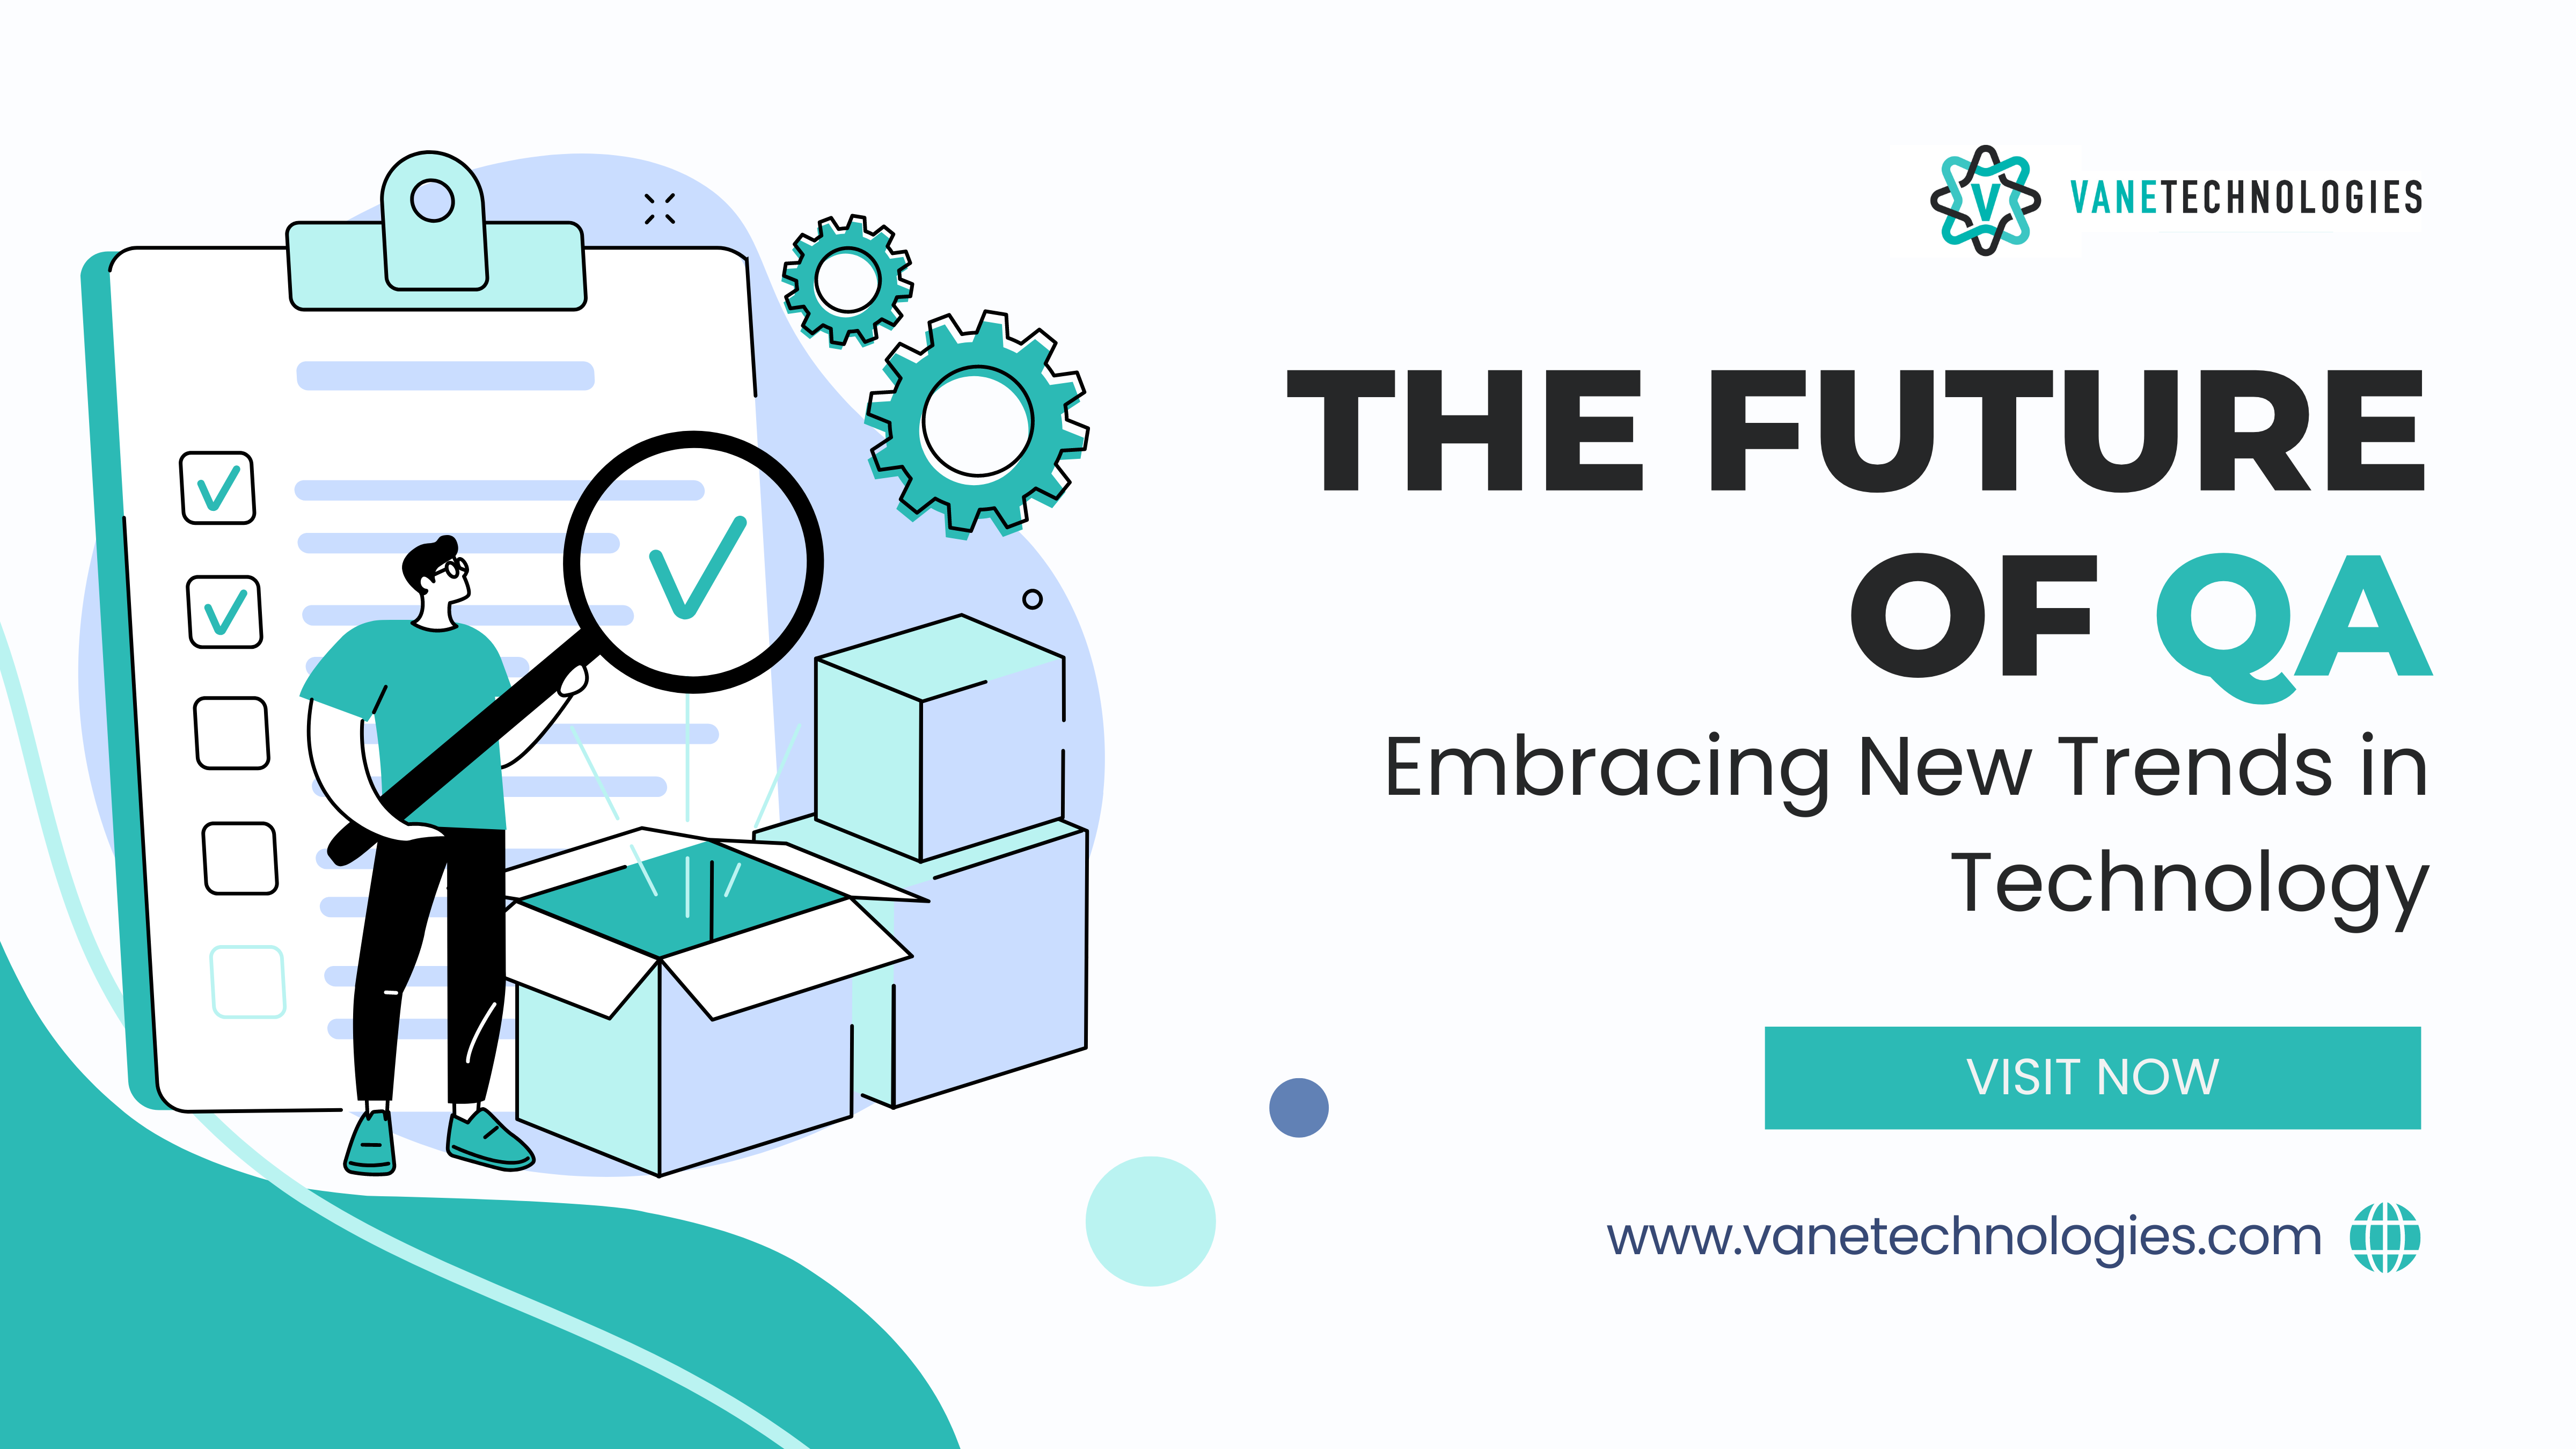 The Future of QA: Embracing New Trends in Technology